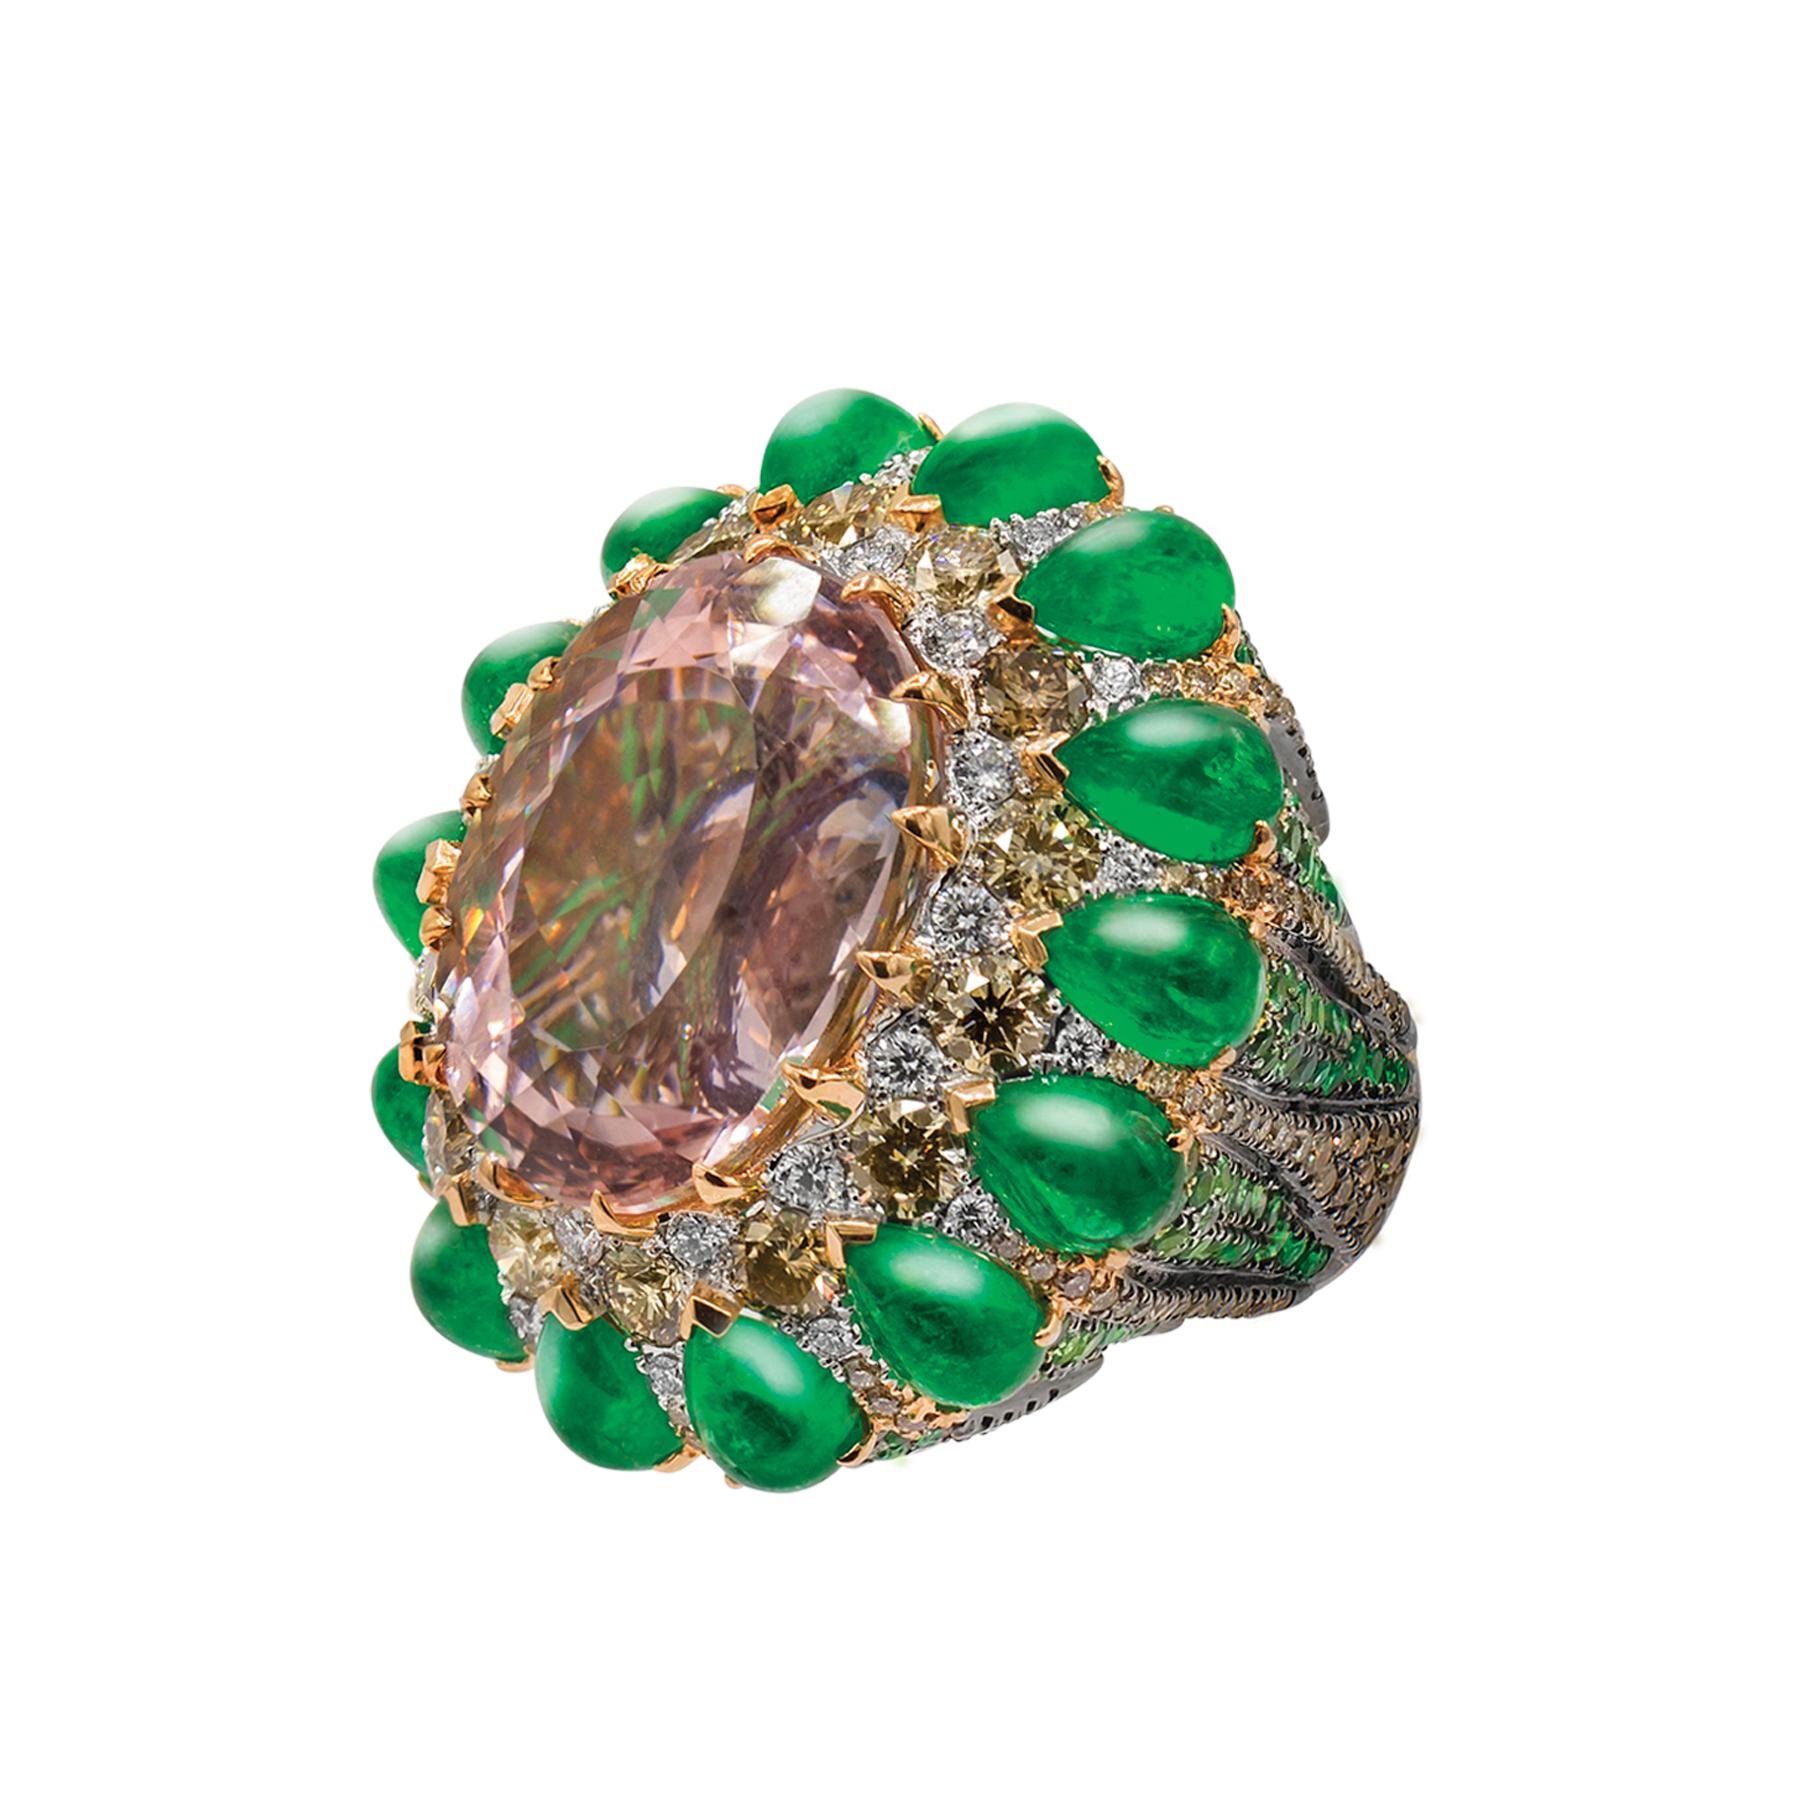 White and Brown Diamonds 3.32 cts, TLB 0.267 cts - Tsavorites 2.35 cts - Aquamarine 0.30 cts - Emeralds Pear Shape 14 pcs 9.07 cts - Morganite 1 pc 22.59 cts         

This remarkable cocktail ring features  emerald pear-shaped tentacles, shaded